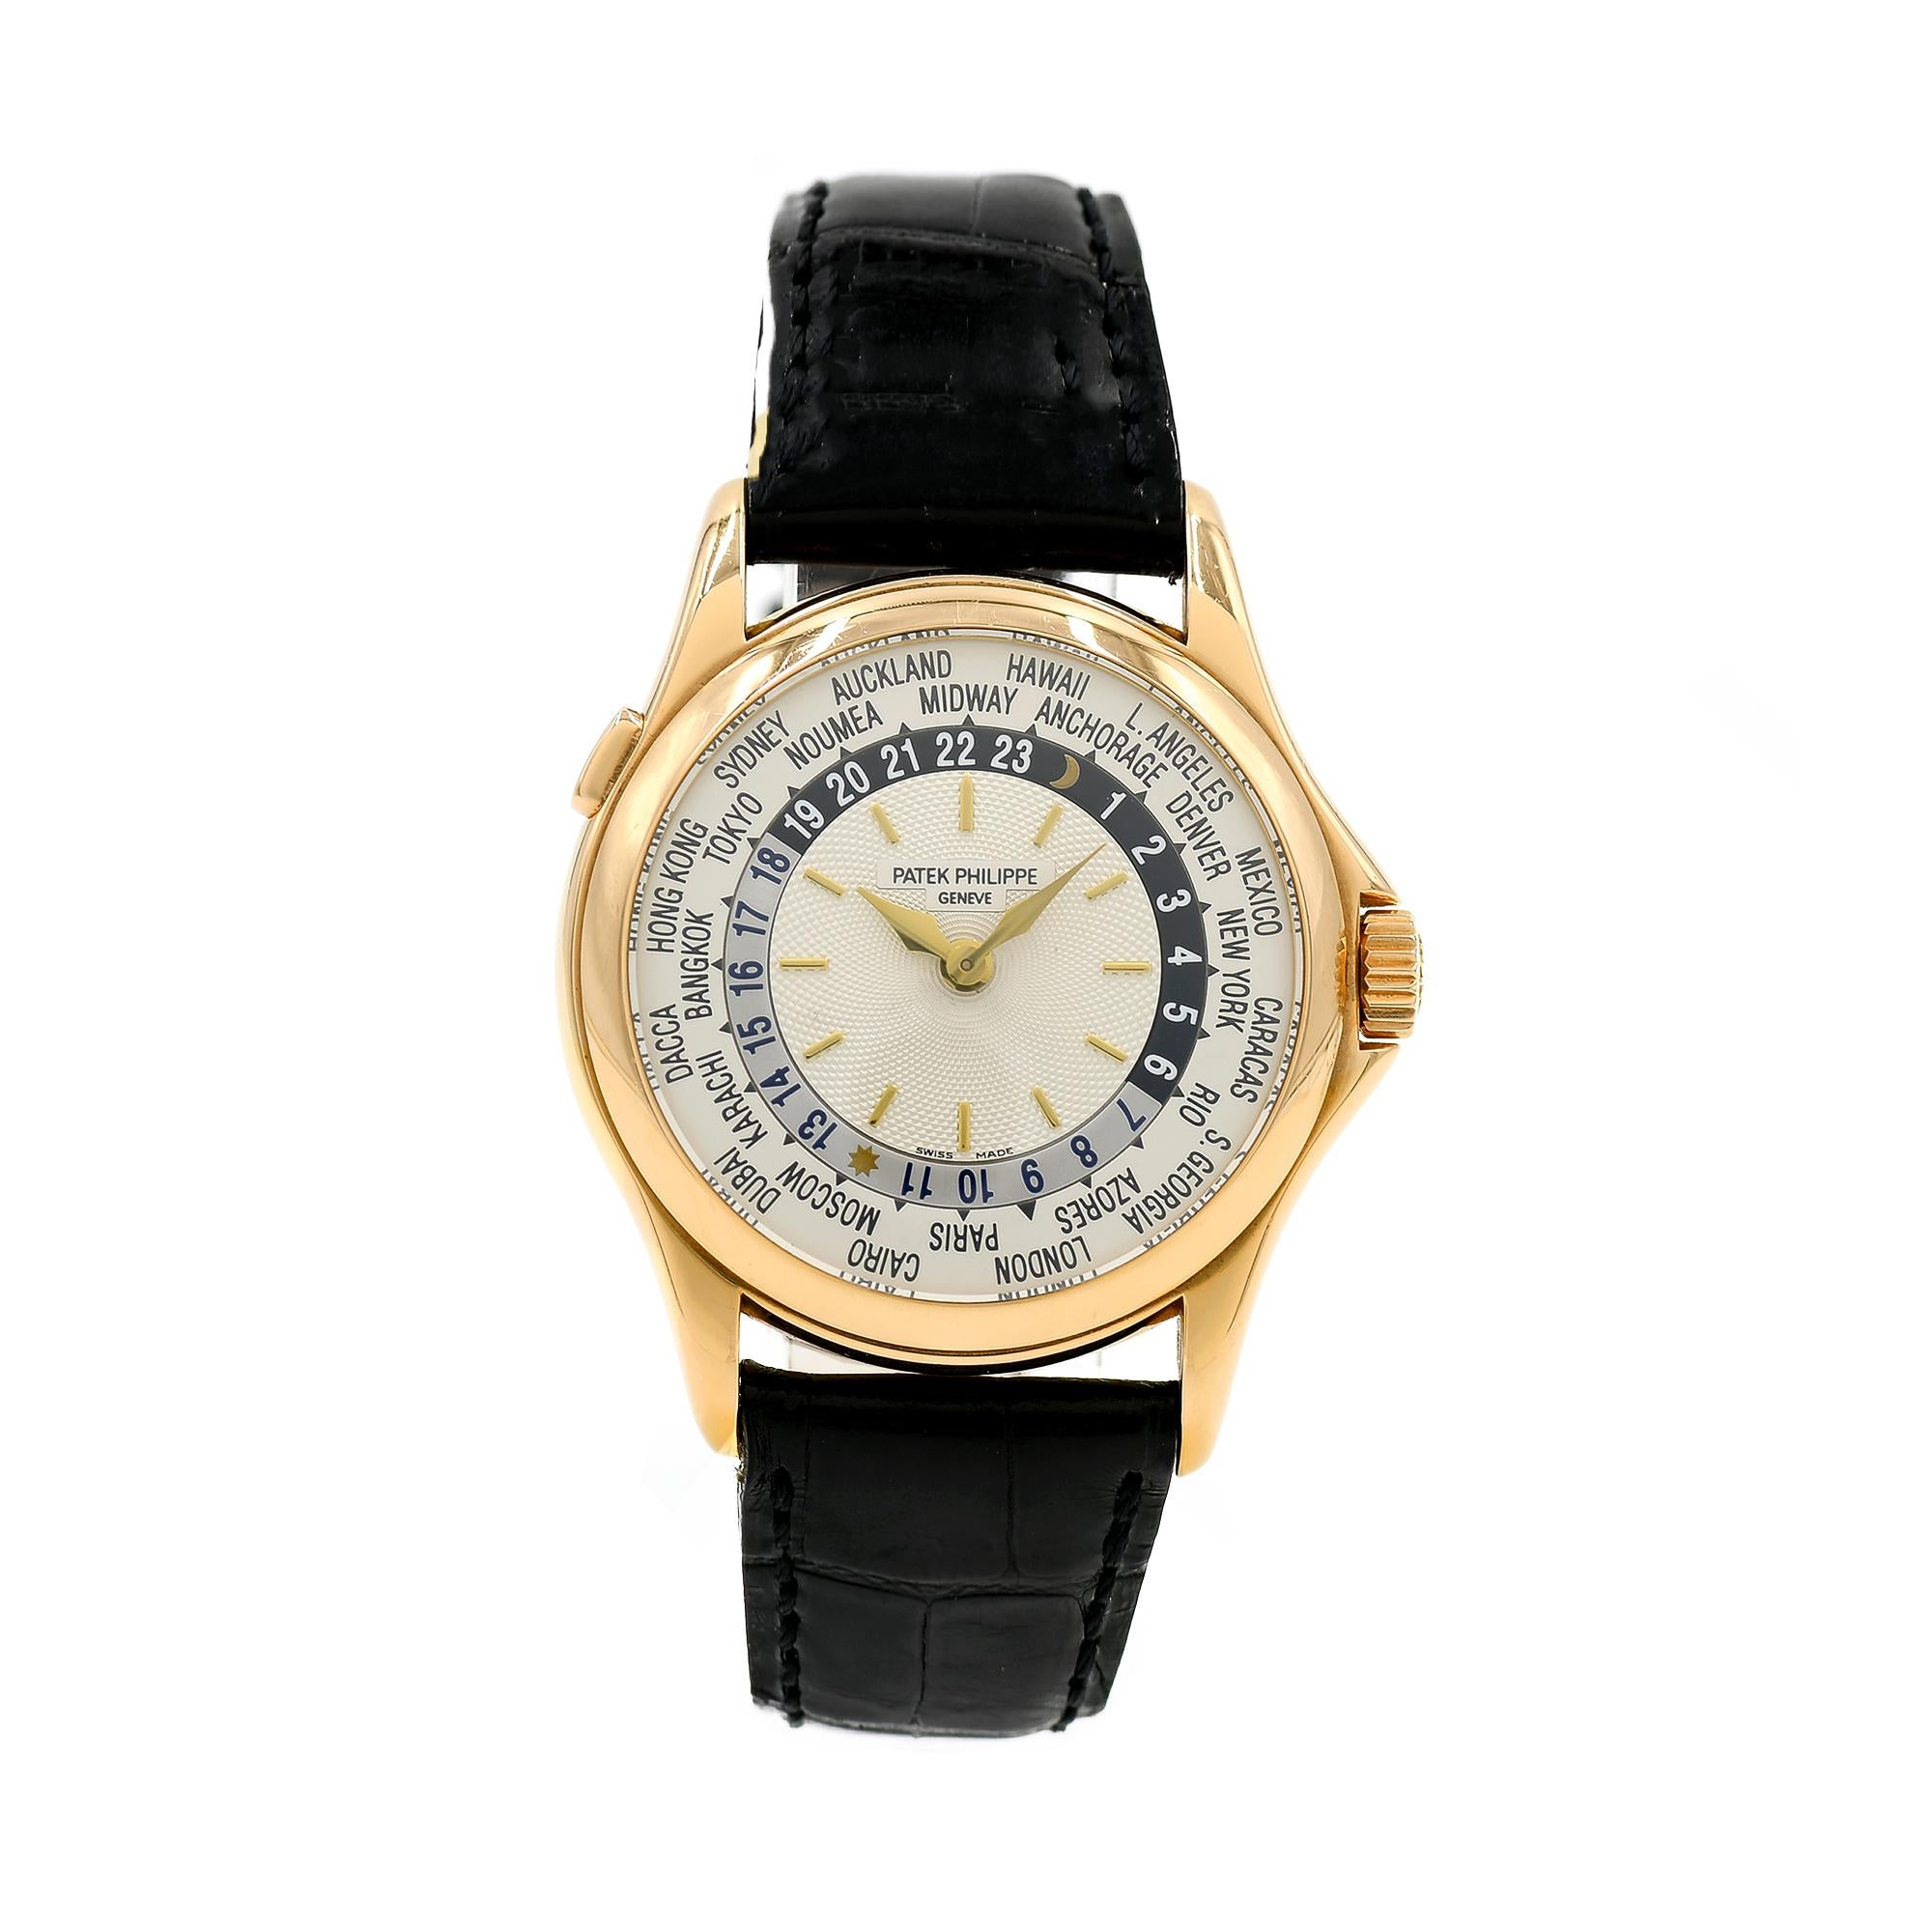 Patek Philippe 18k yellow gold World Time wristwatch, Ref. 5110J, automatic movement. Patek Philippe strap. Box included but no papers. 

18k Yellow Gold 
Length: 45mm 
Width: 36mm 
Strap width at case: 20mm 
Case thickness: 9.8mm 
Buckle: 18k